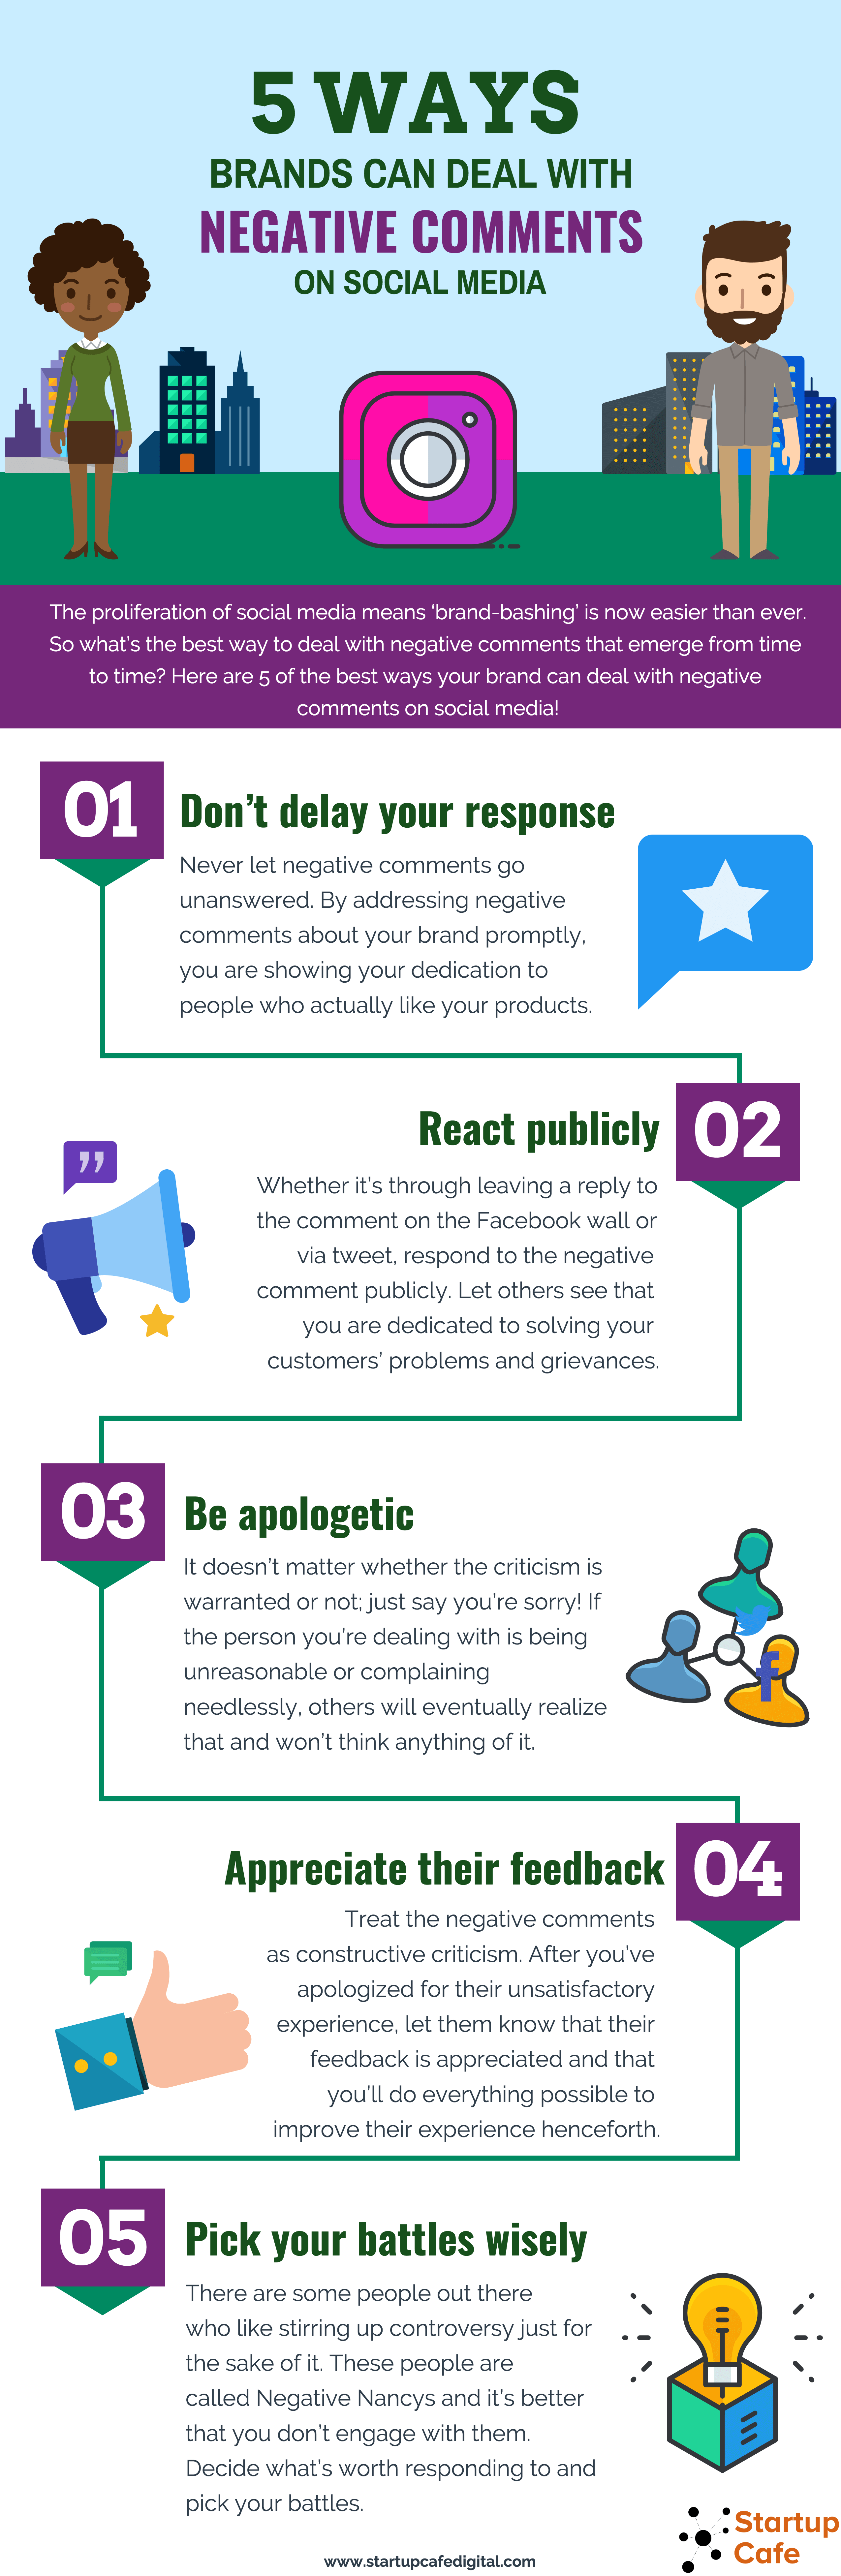 5 Ways Brands can Deal with Negative Comments on Social Media - Infographic by Startup Cafe Digital